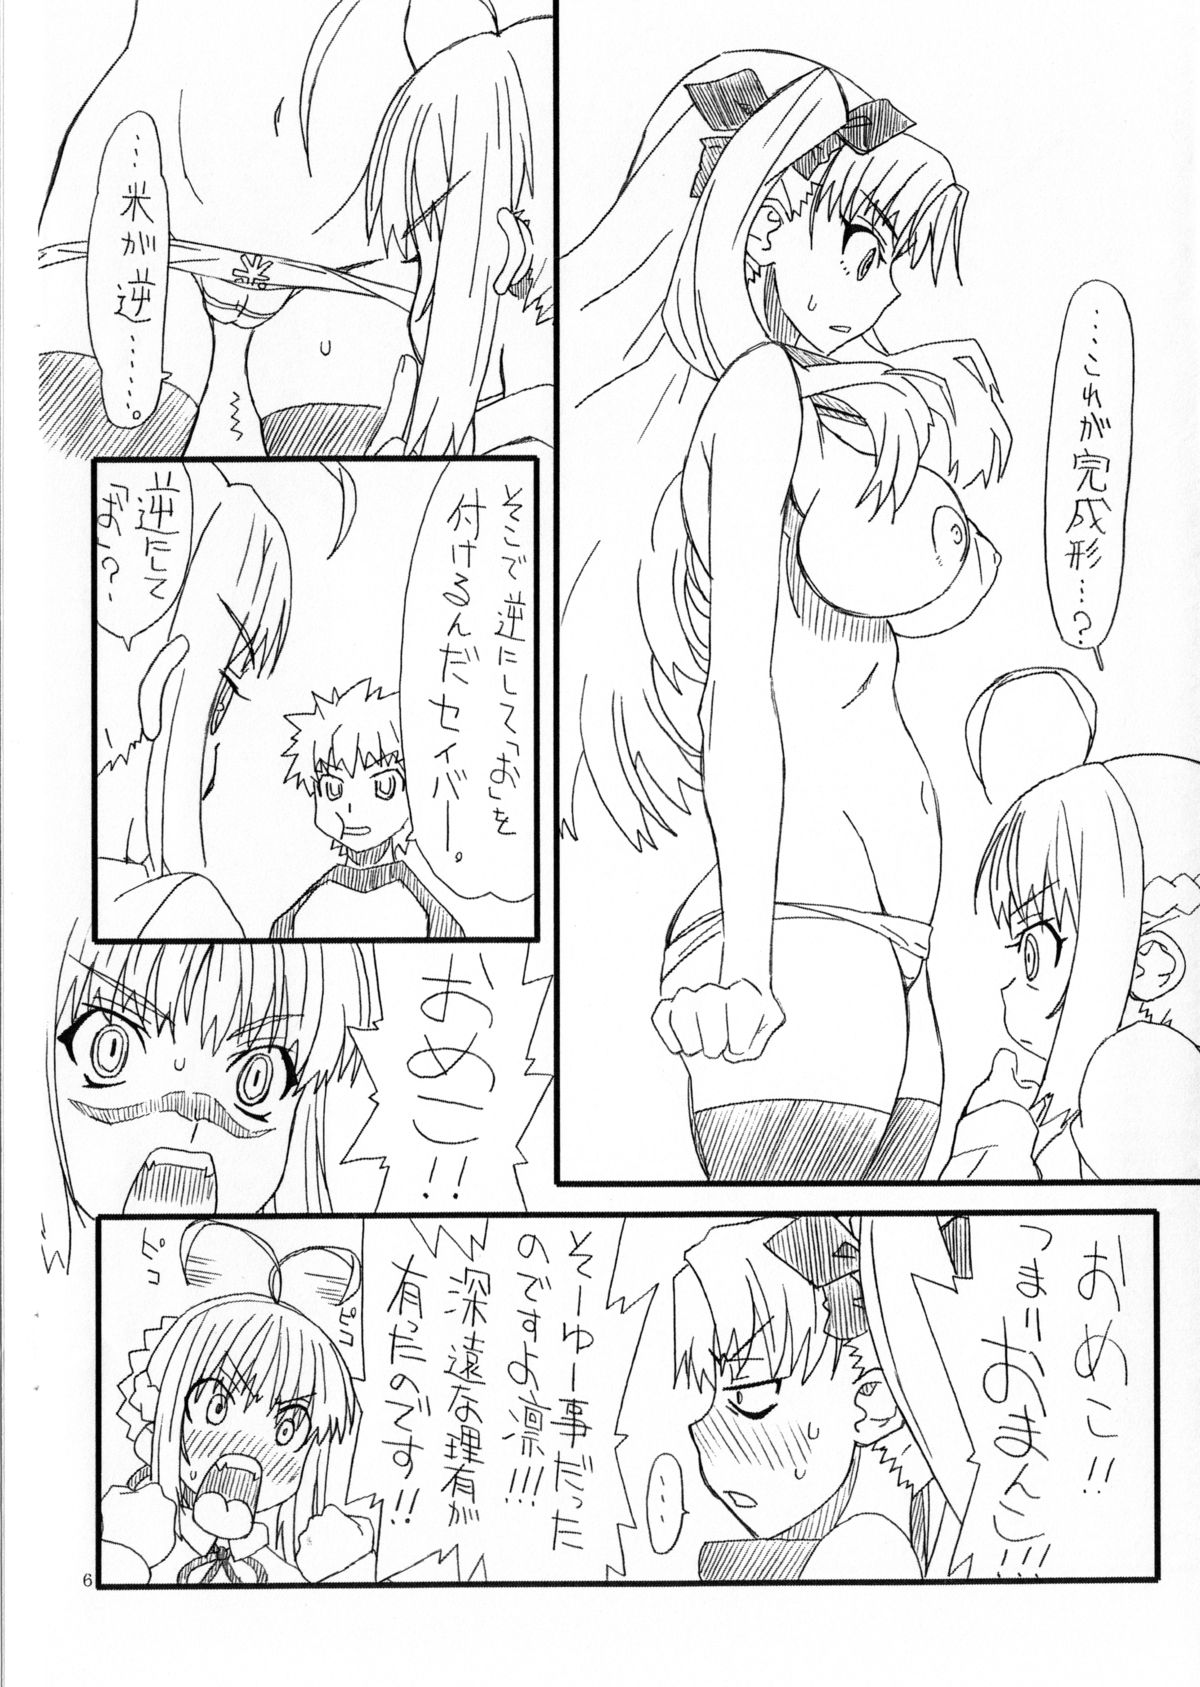 (SC65) [Power Slide (Uttorikun)] Rin to saber 1st Ver0.5 (Fate/stay night) page 7 full